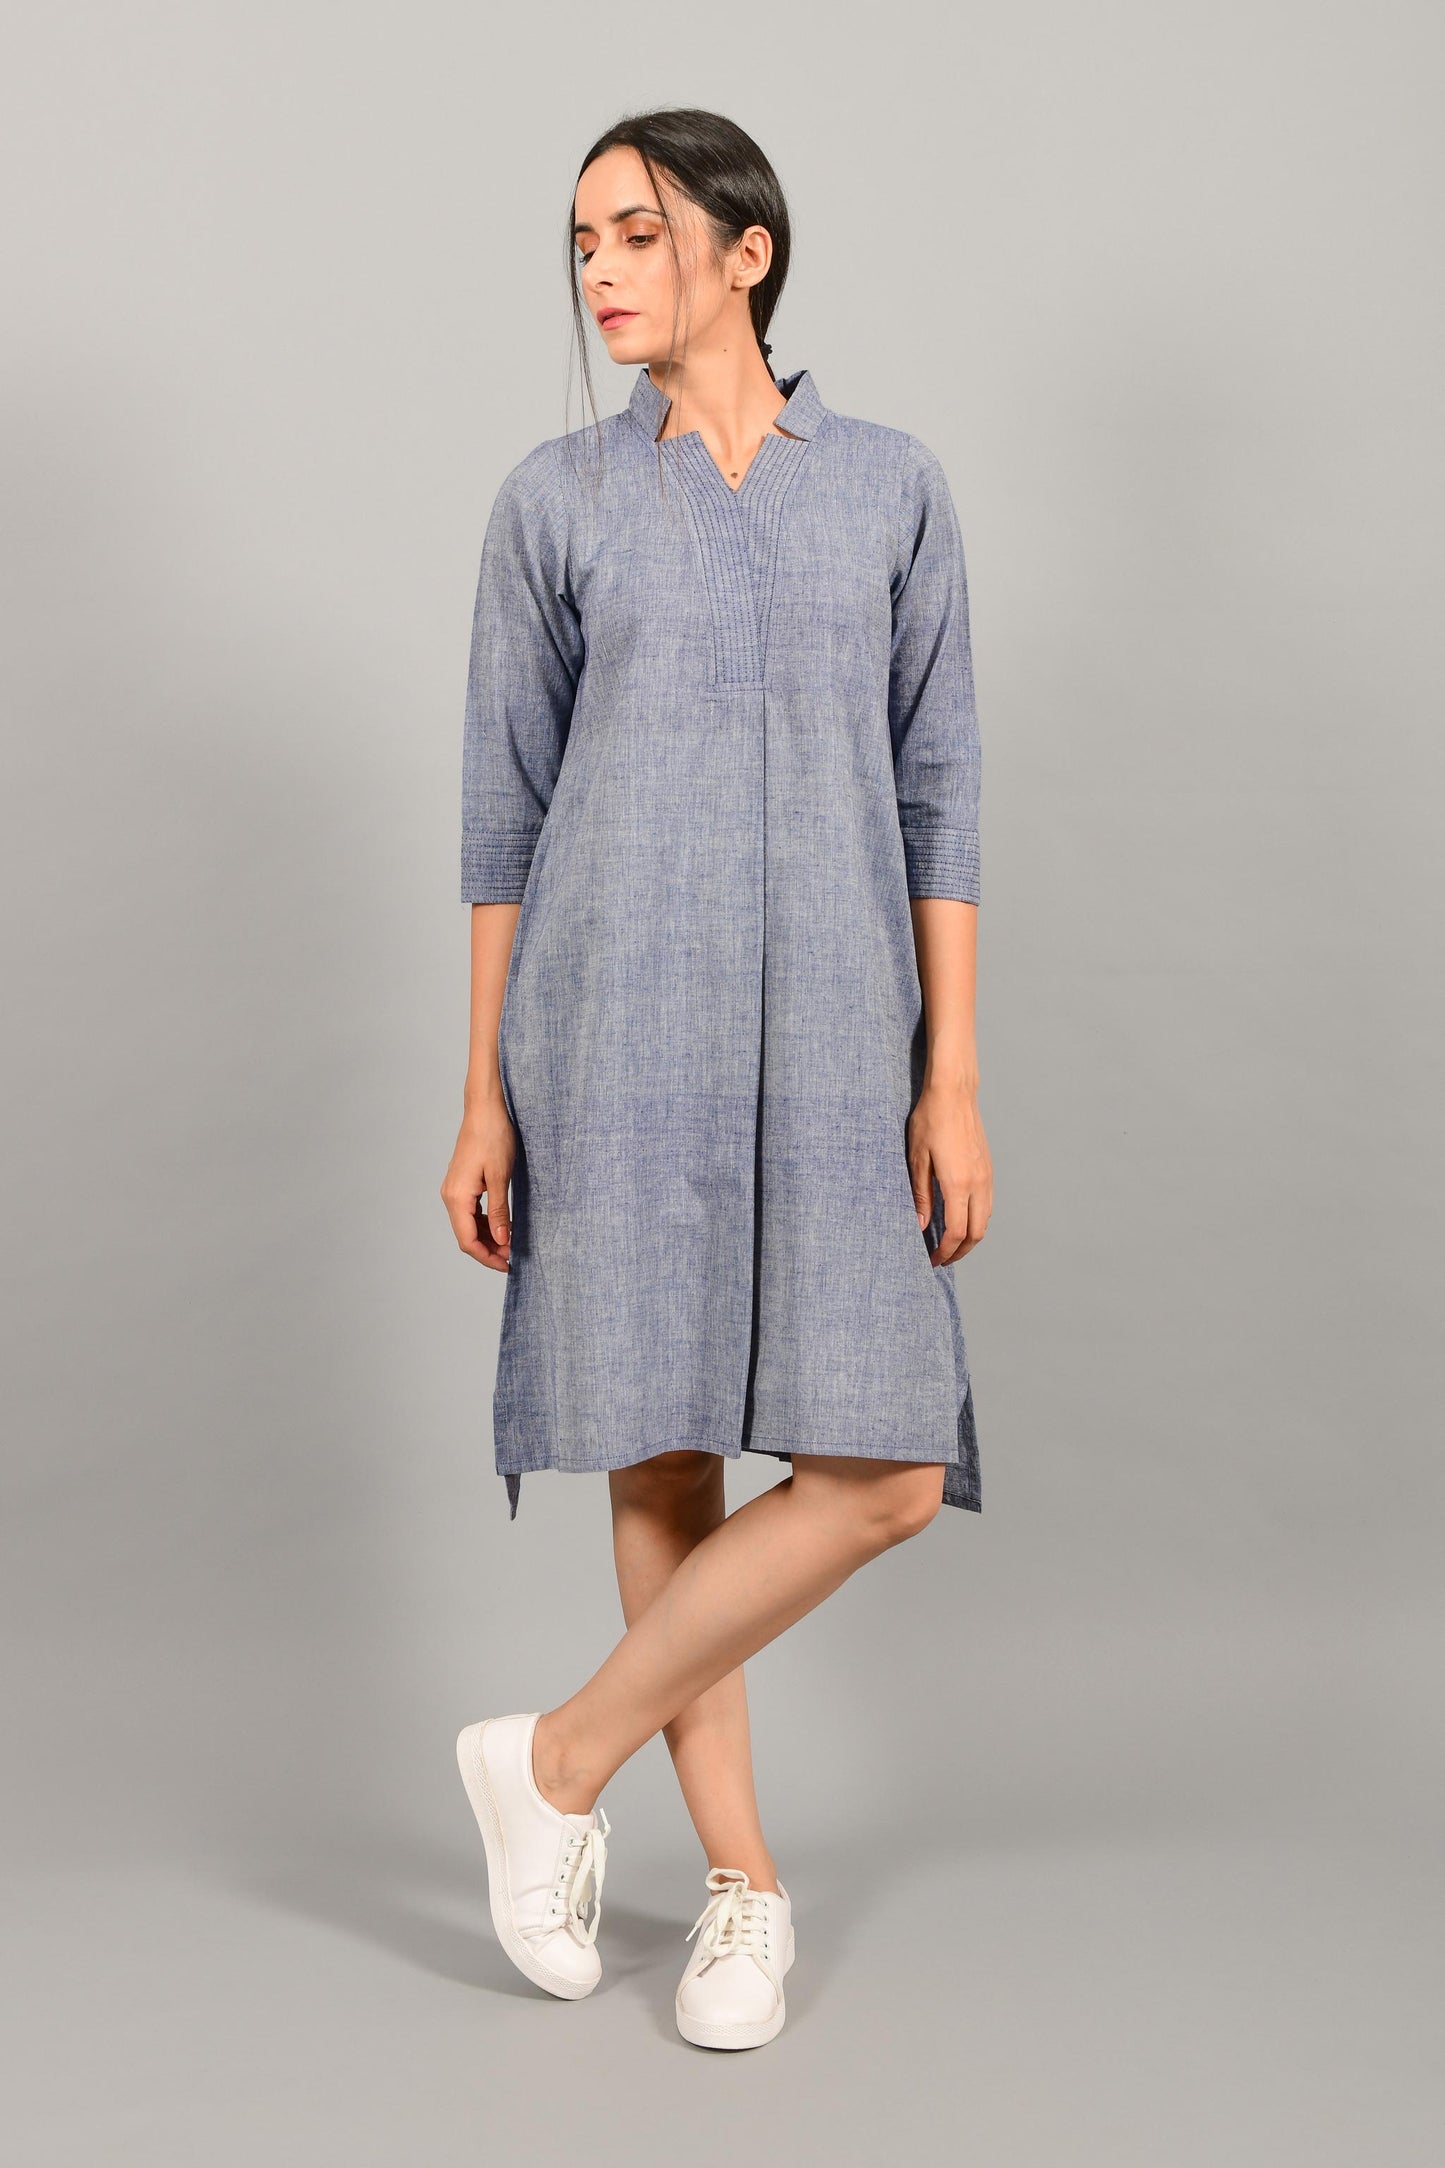 Front pose of an Indian female womenswear fashion model in a blue chambray handspun and handwoven khadi cotton dress-kurta by Cotton Rack.